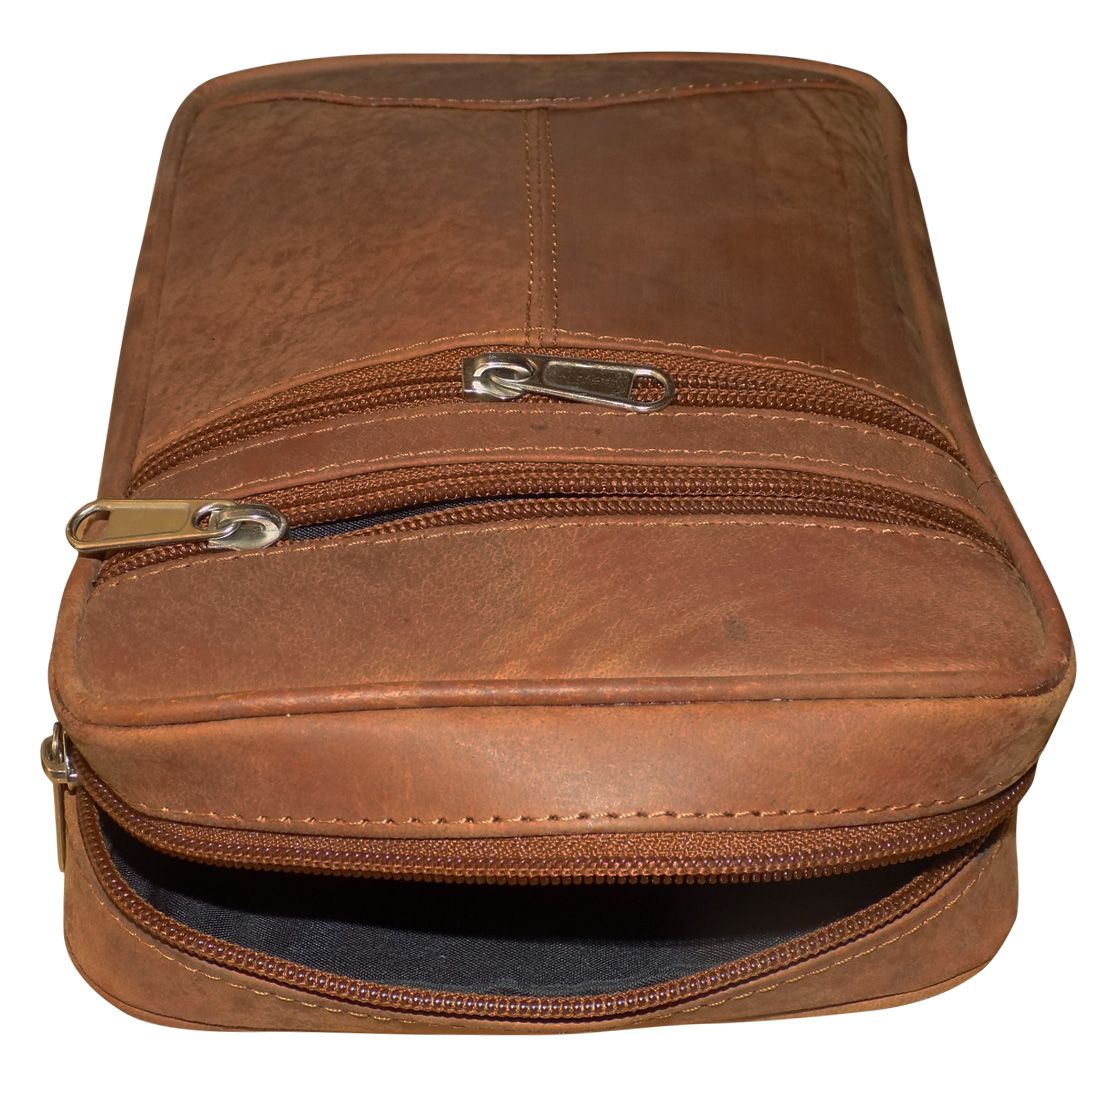 Style98 Brown Leather Travel Pouch - Buy Style98 Brown Leather Travel ...